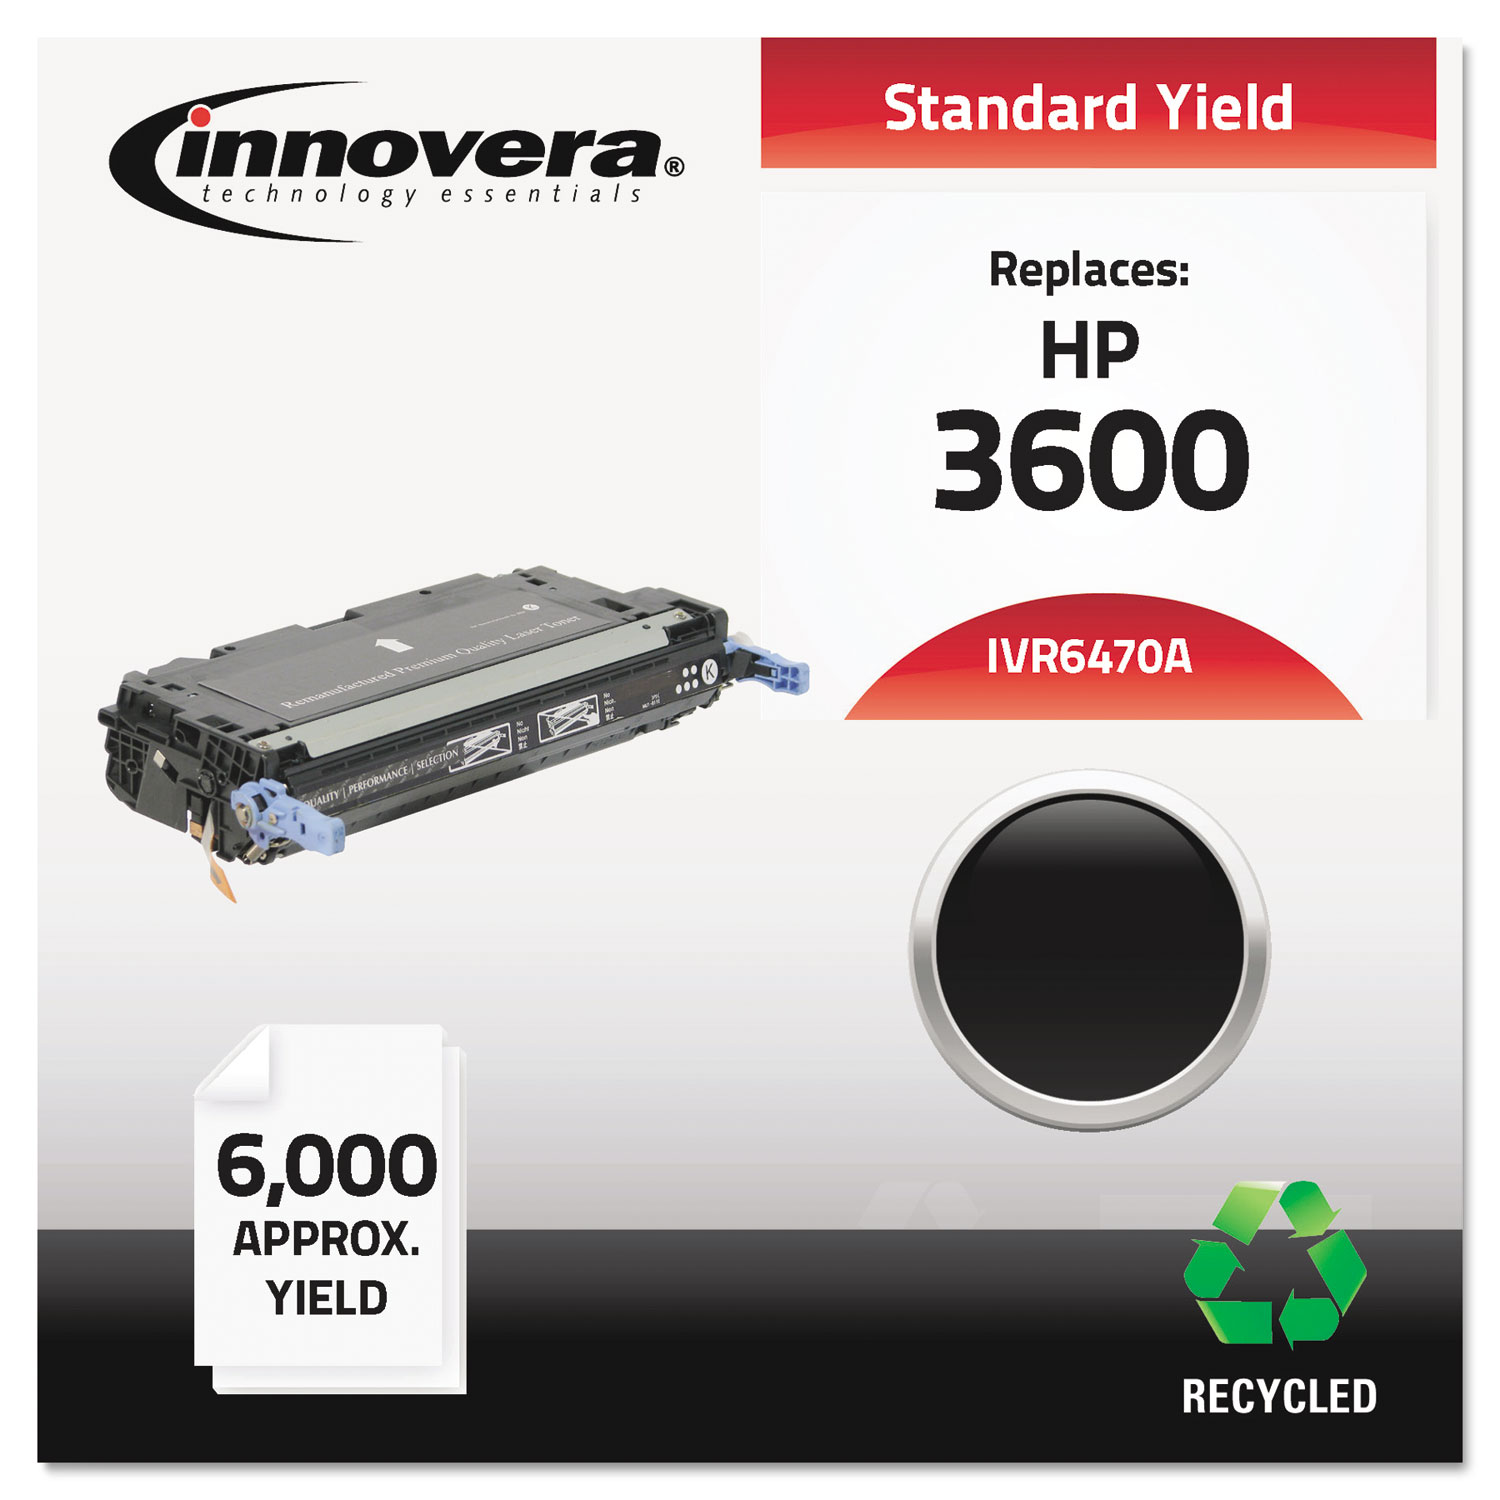 Remanufactured Q6470A (501A) Toner, 6000 Page-Yield, Black